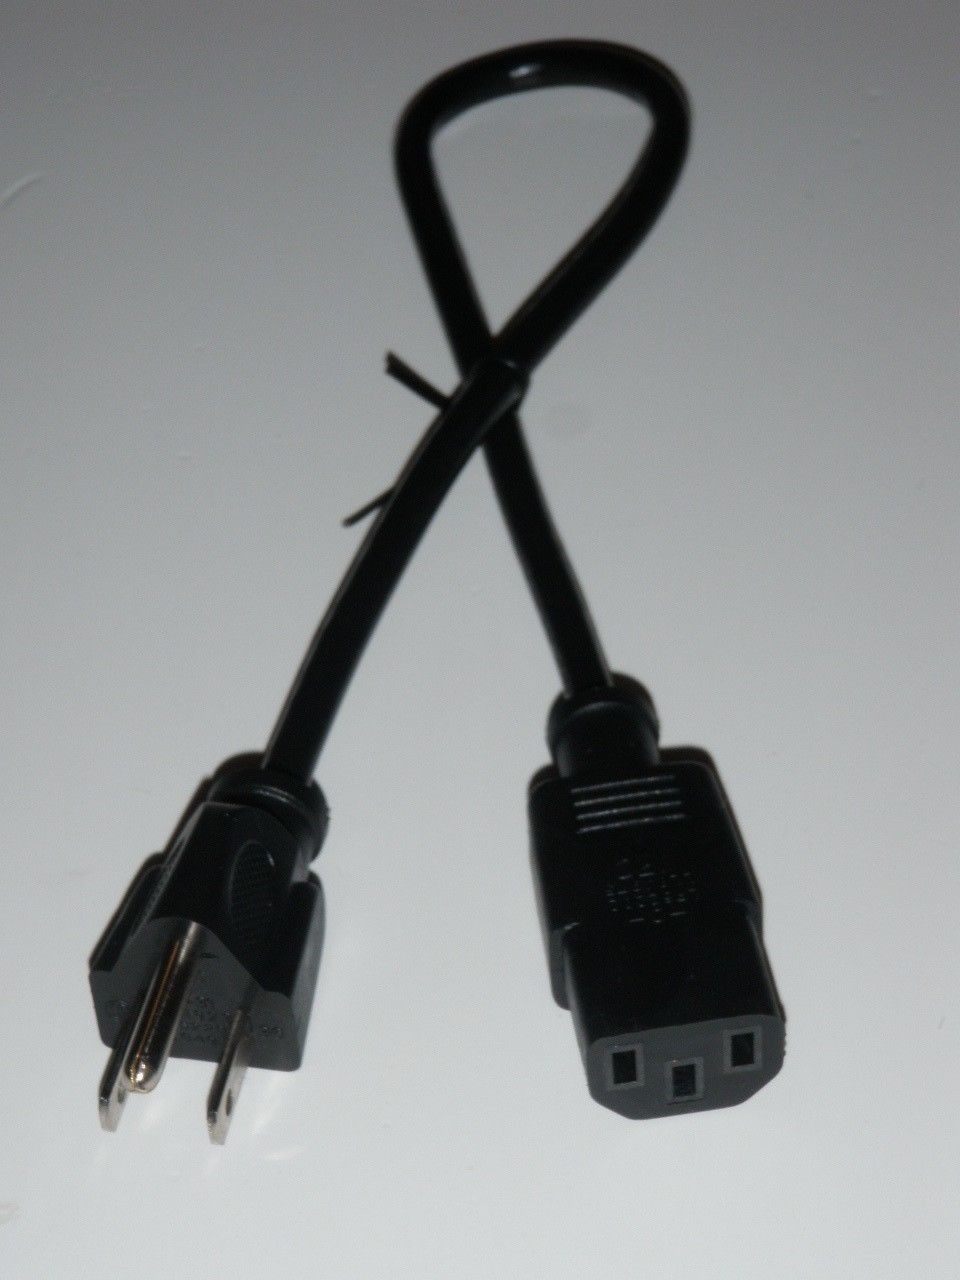 Black Power Cord for Tayama Cool Touch Rice Cooker Model TRC-10 (3pin 24") - $13.71